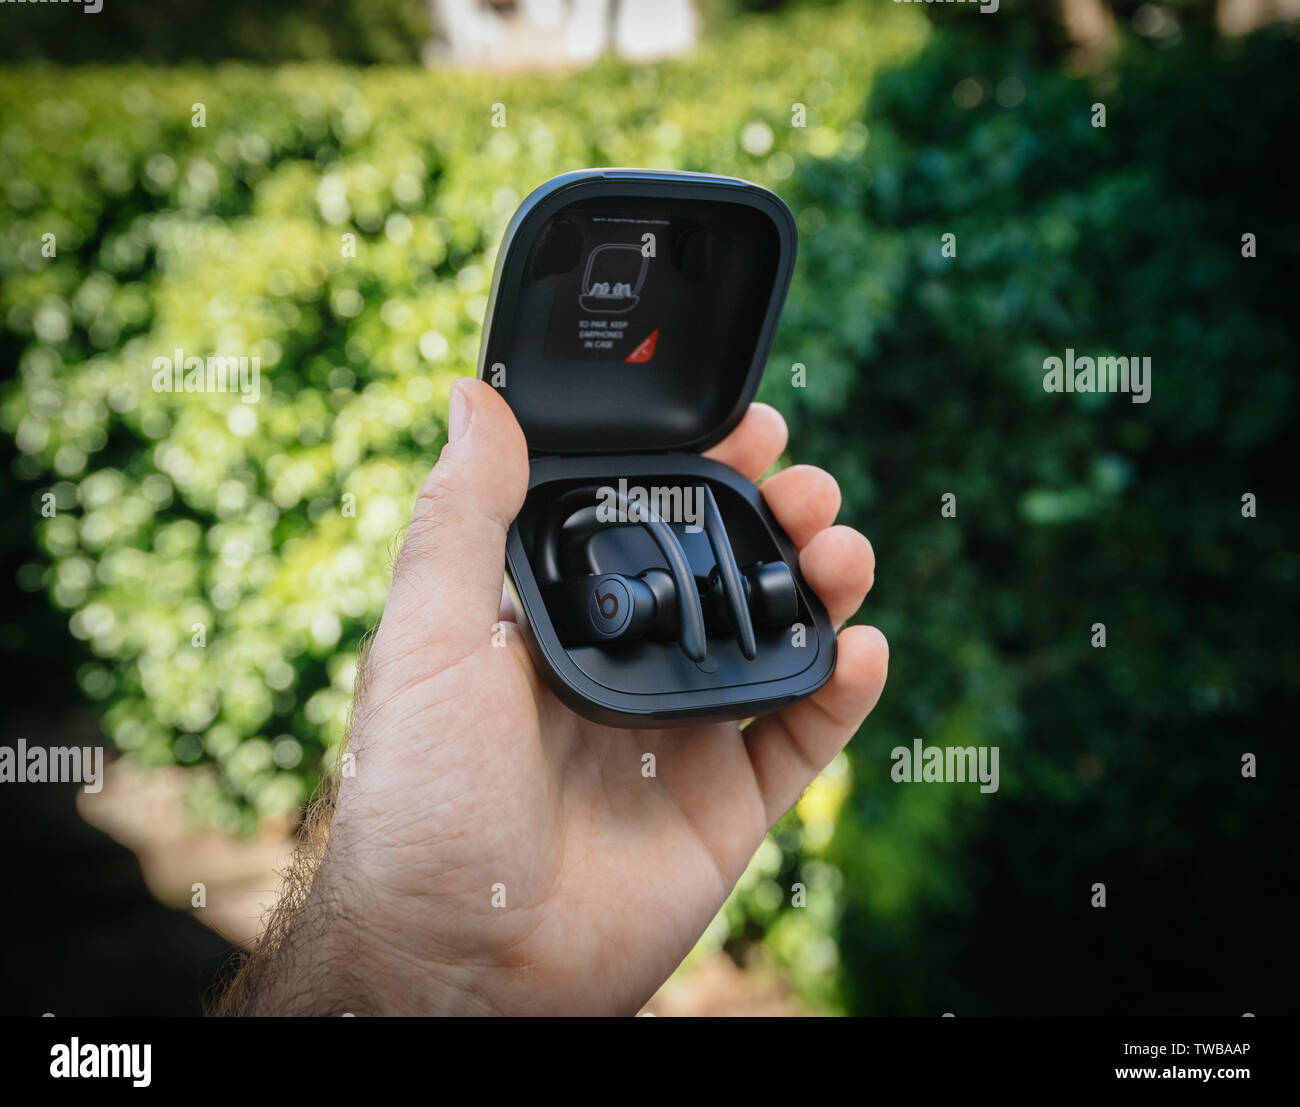 Paris, France - Jun 17, 2019: Side view of Powerbeats Pro Beats by Dr Dre wireless high-performance earphones charging case after unboxing man hand holding admiring the new music device Stock Photo